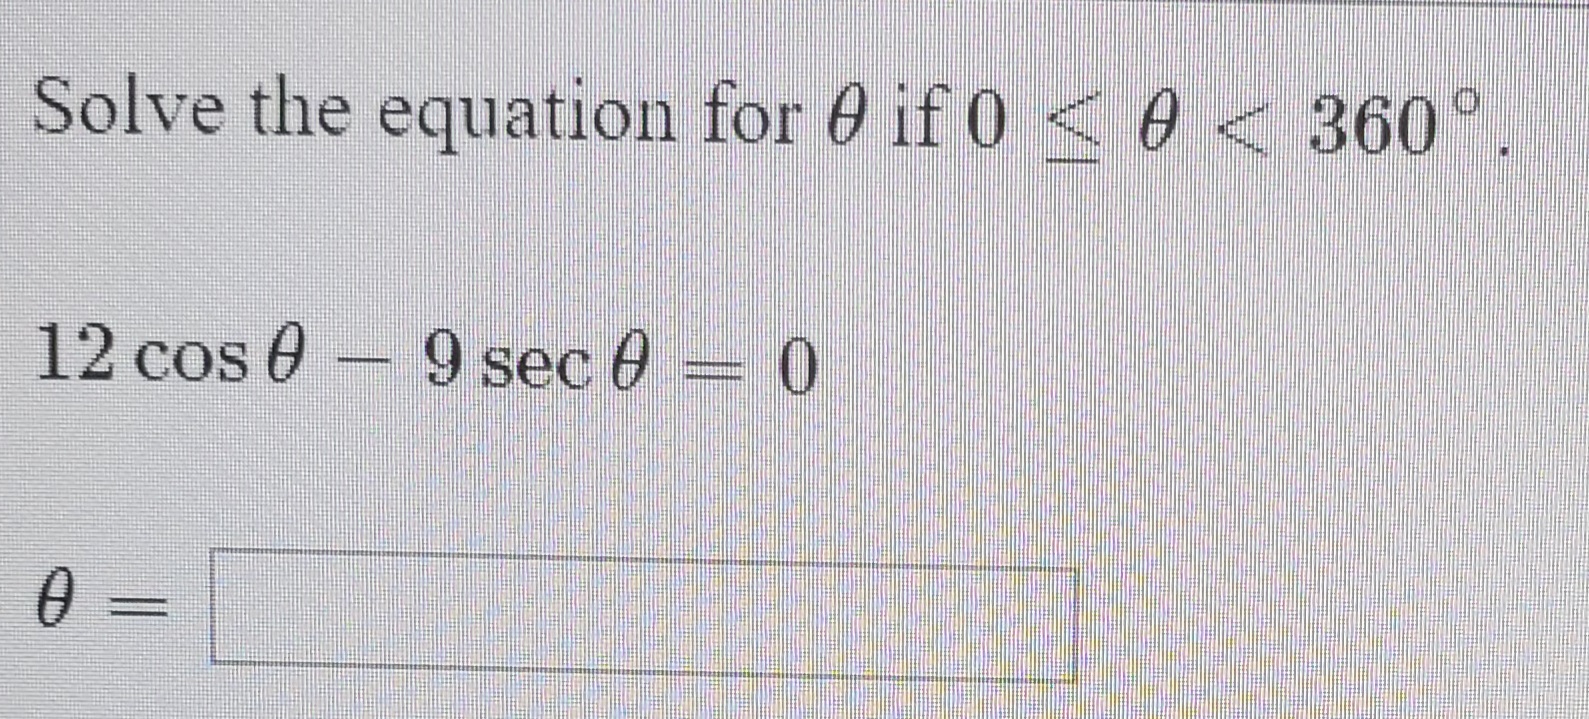 Solve the equation for 0 if 0 <0 < 360°
12 cos 0 - 9 sec 0 = 0
